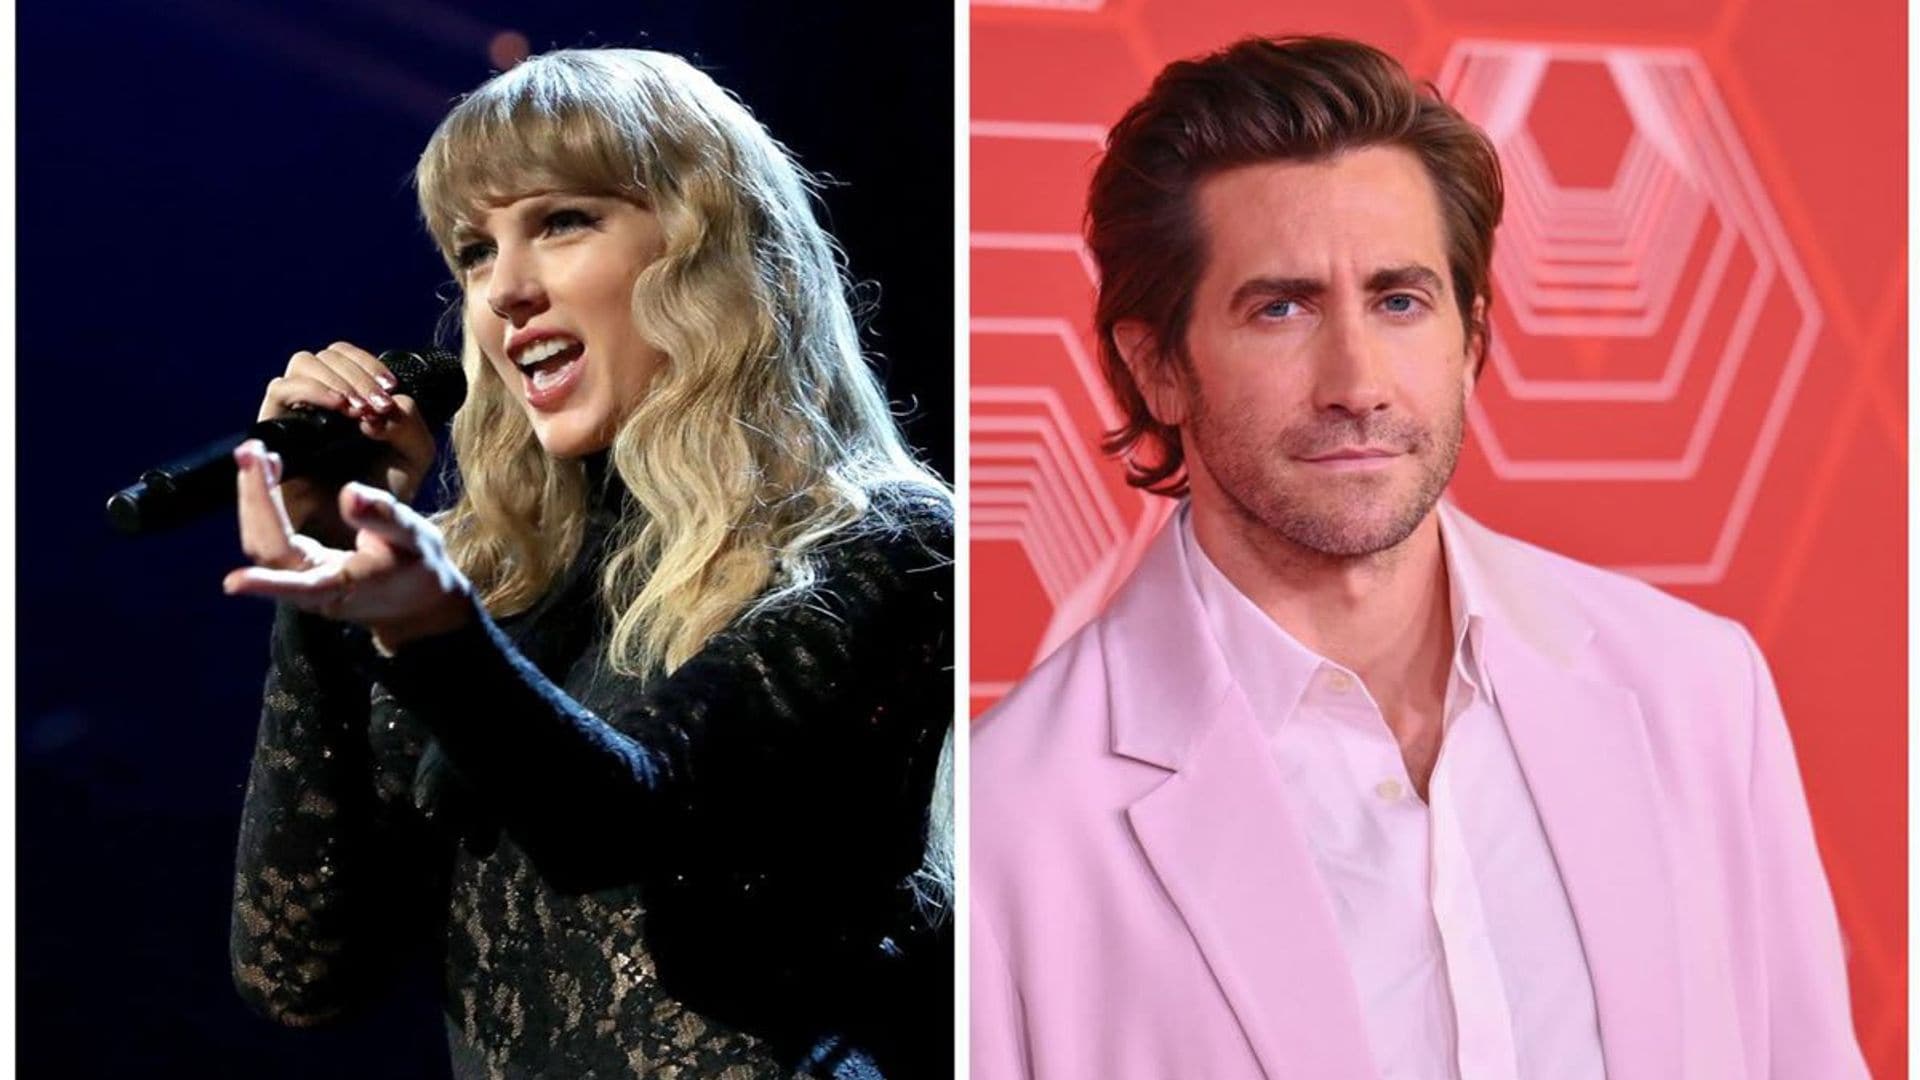 Taylor Swift and Jake Gyllenhaal: The singer reveals real reason for their breakup